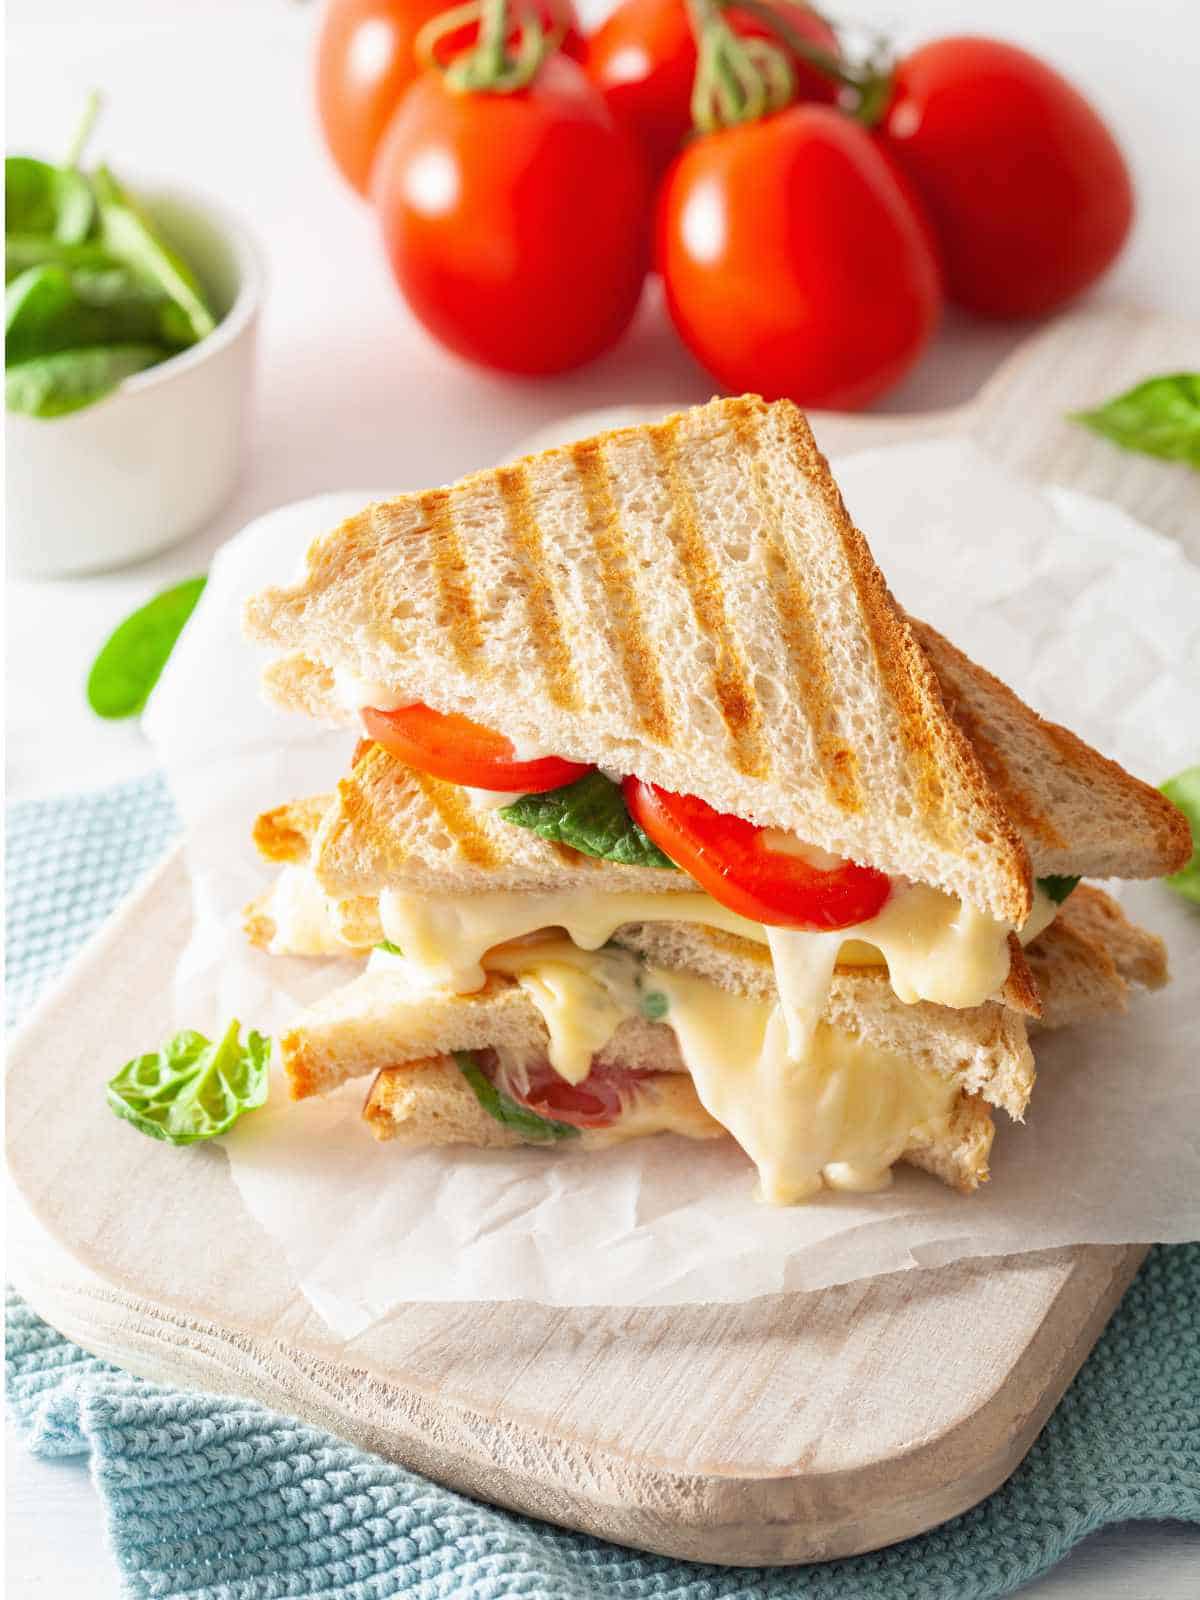 grilled cheese and tomato sandwich on white background.